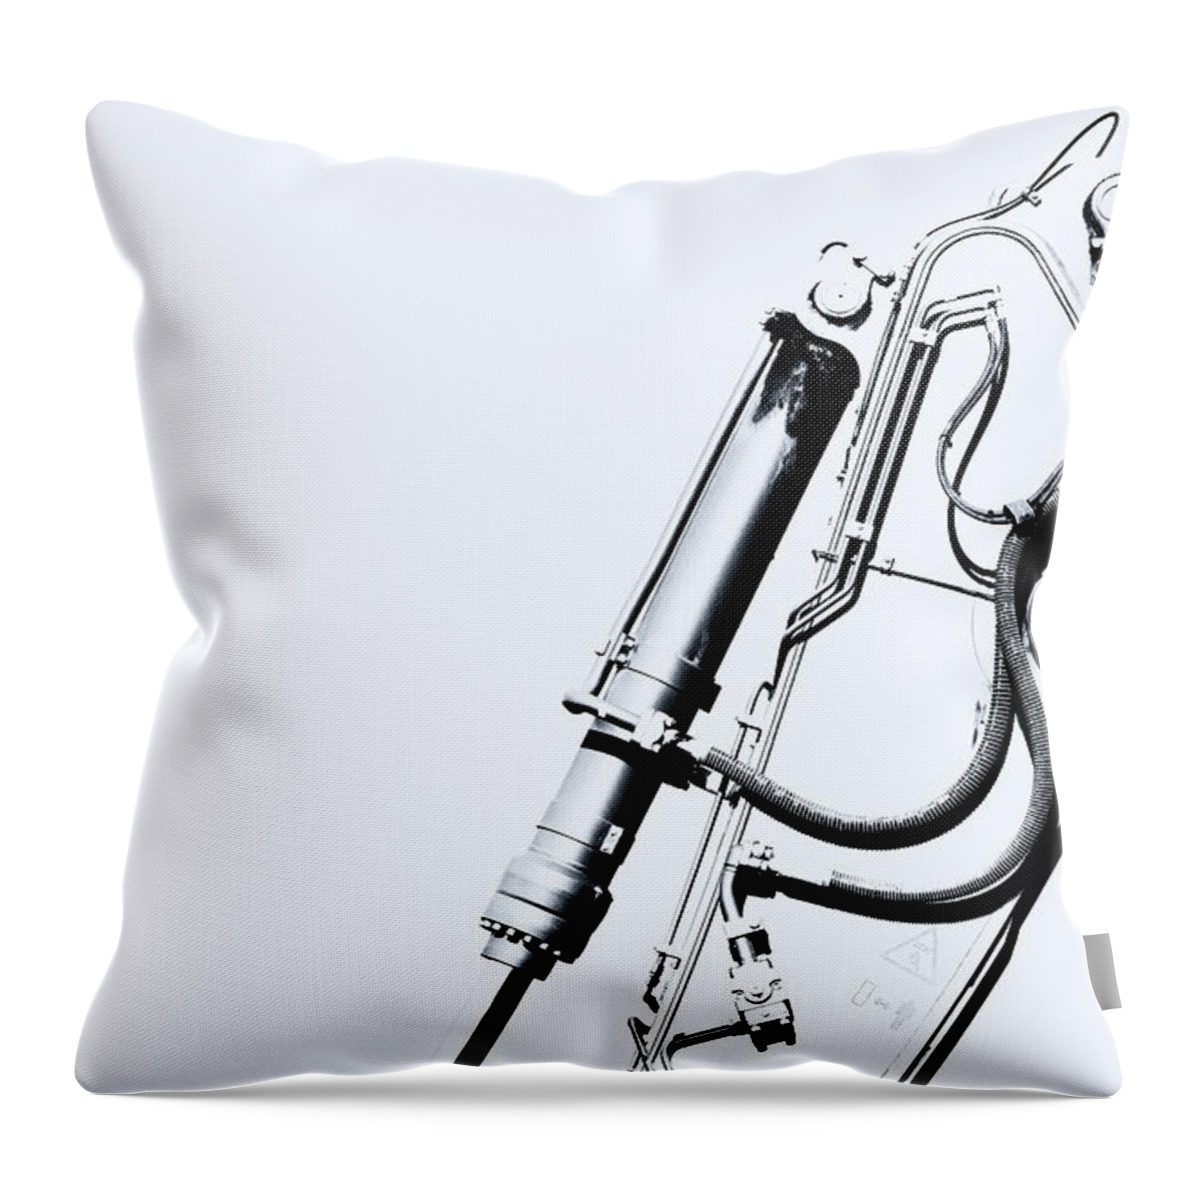 Industrial Digger Throw Pillow featuring the photograph Arm of Bleach Industrial Digger by John Williams